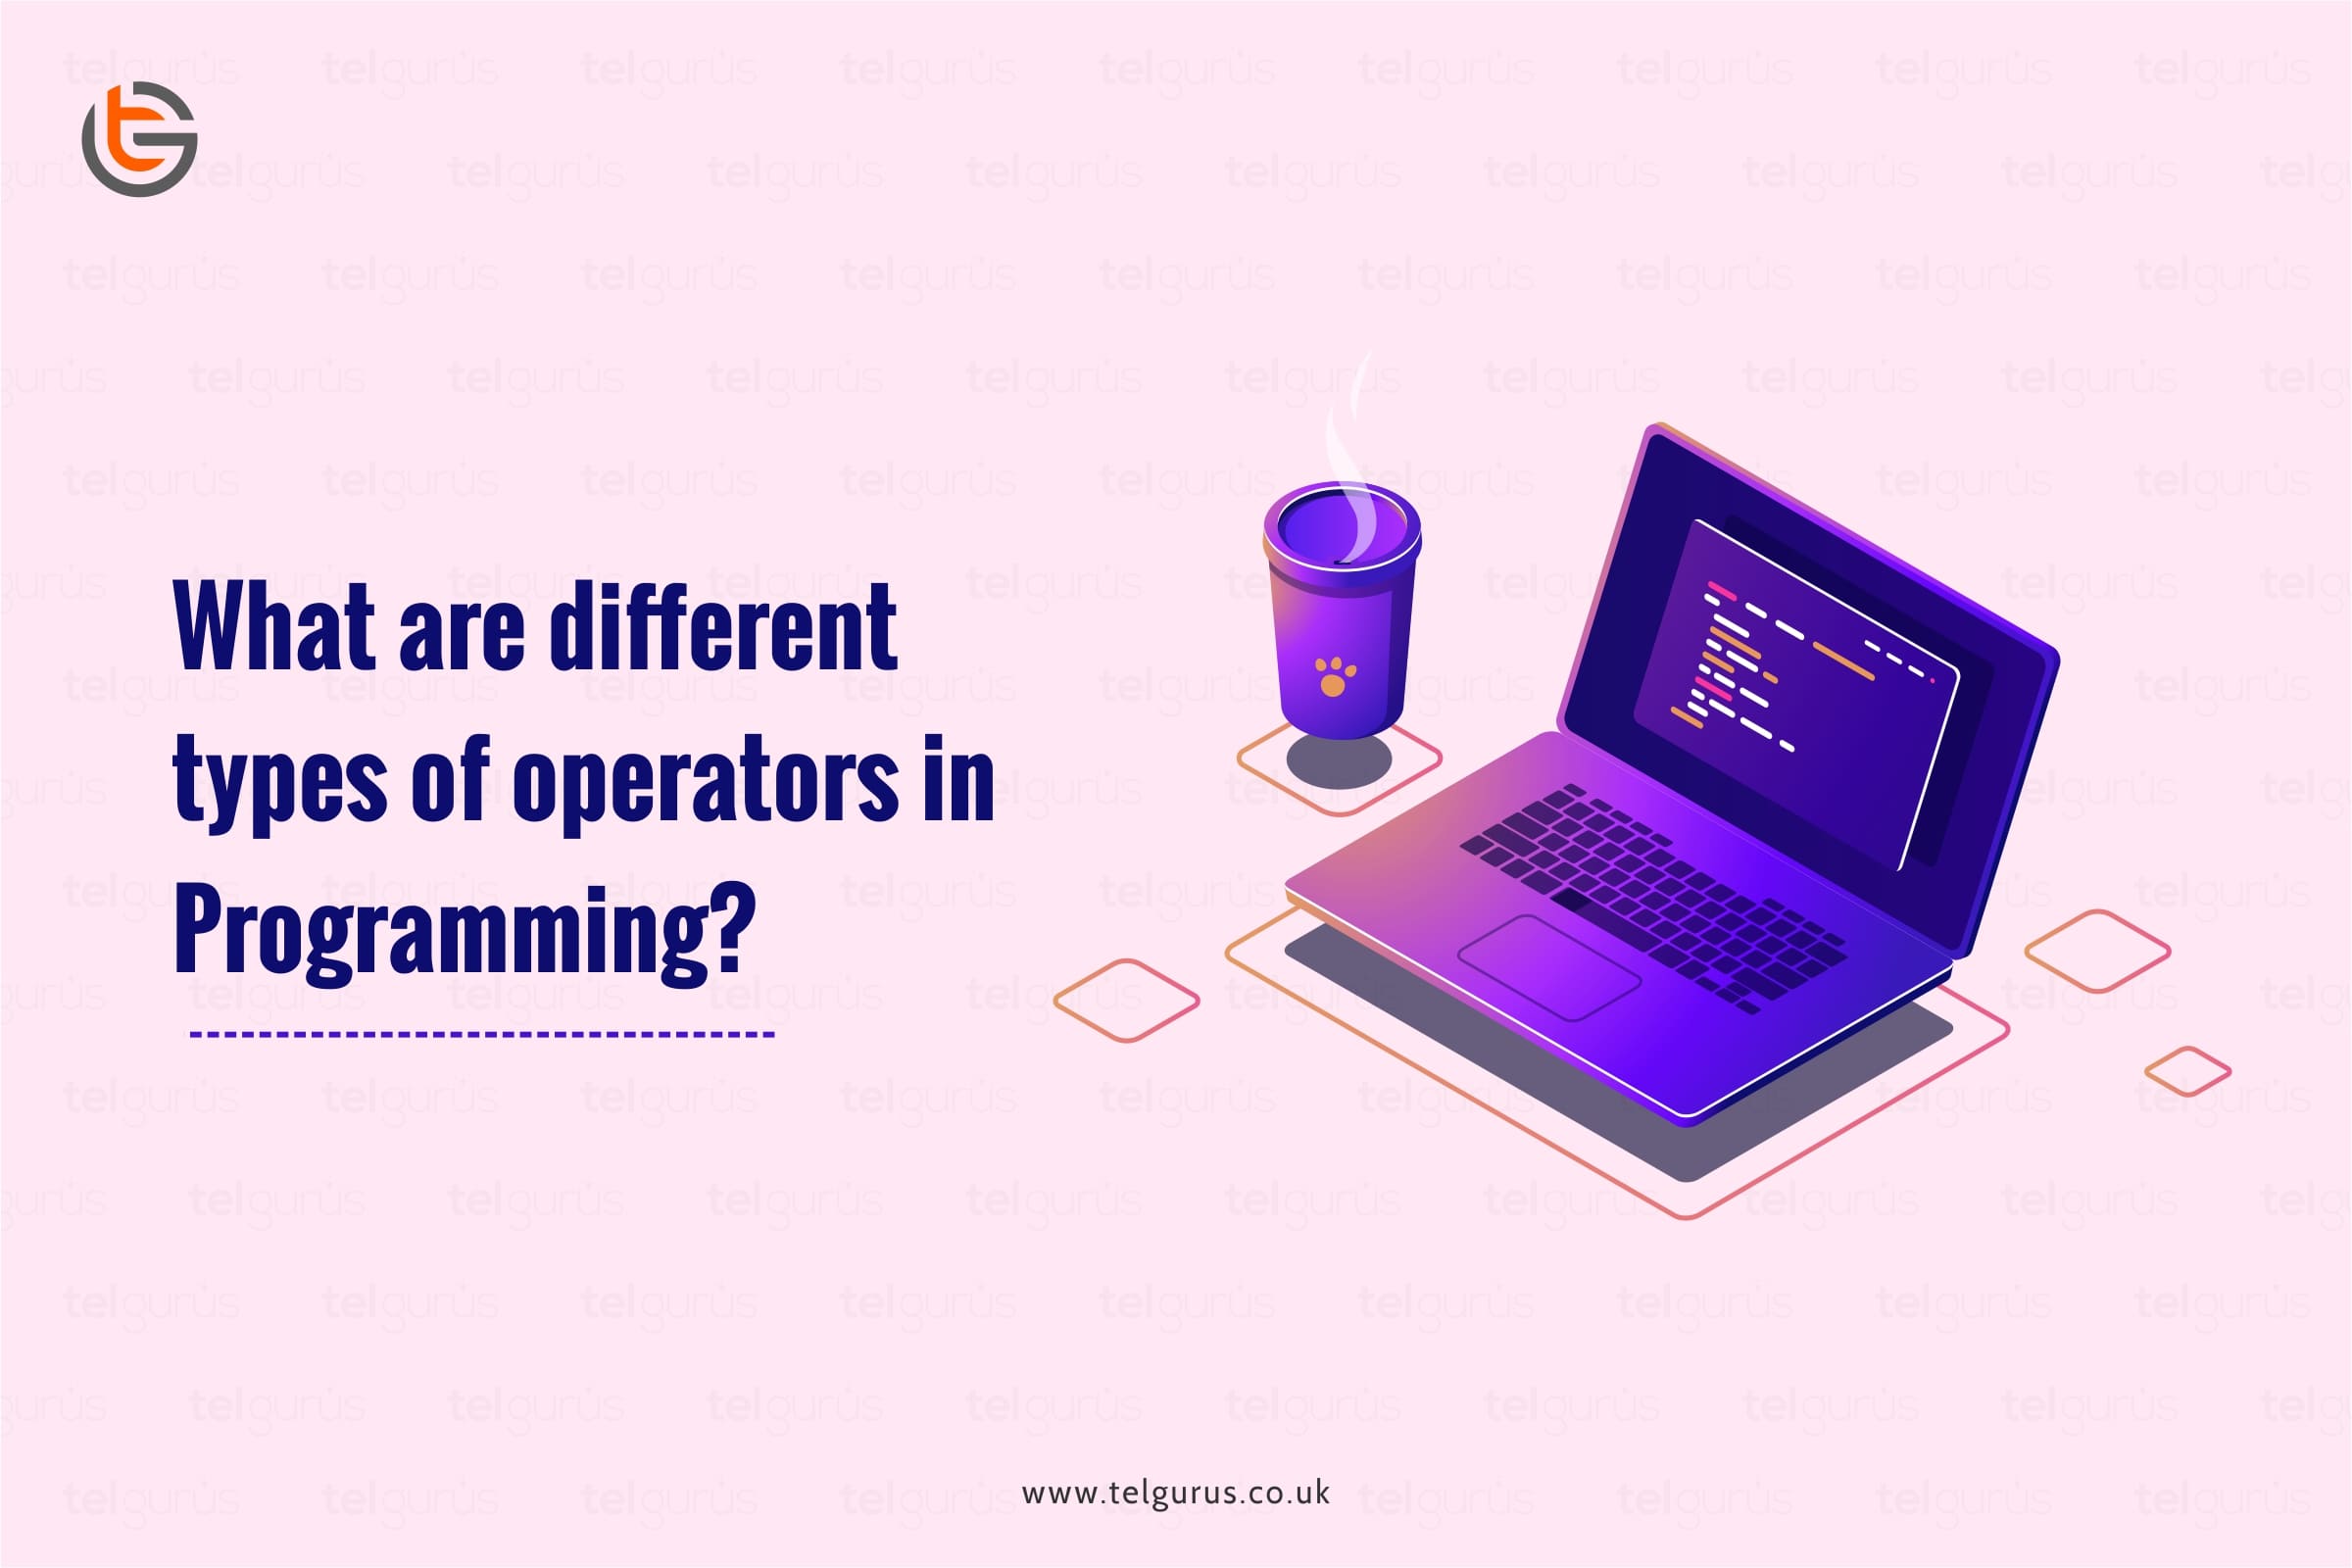 What are different types of operators in Programming